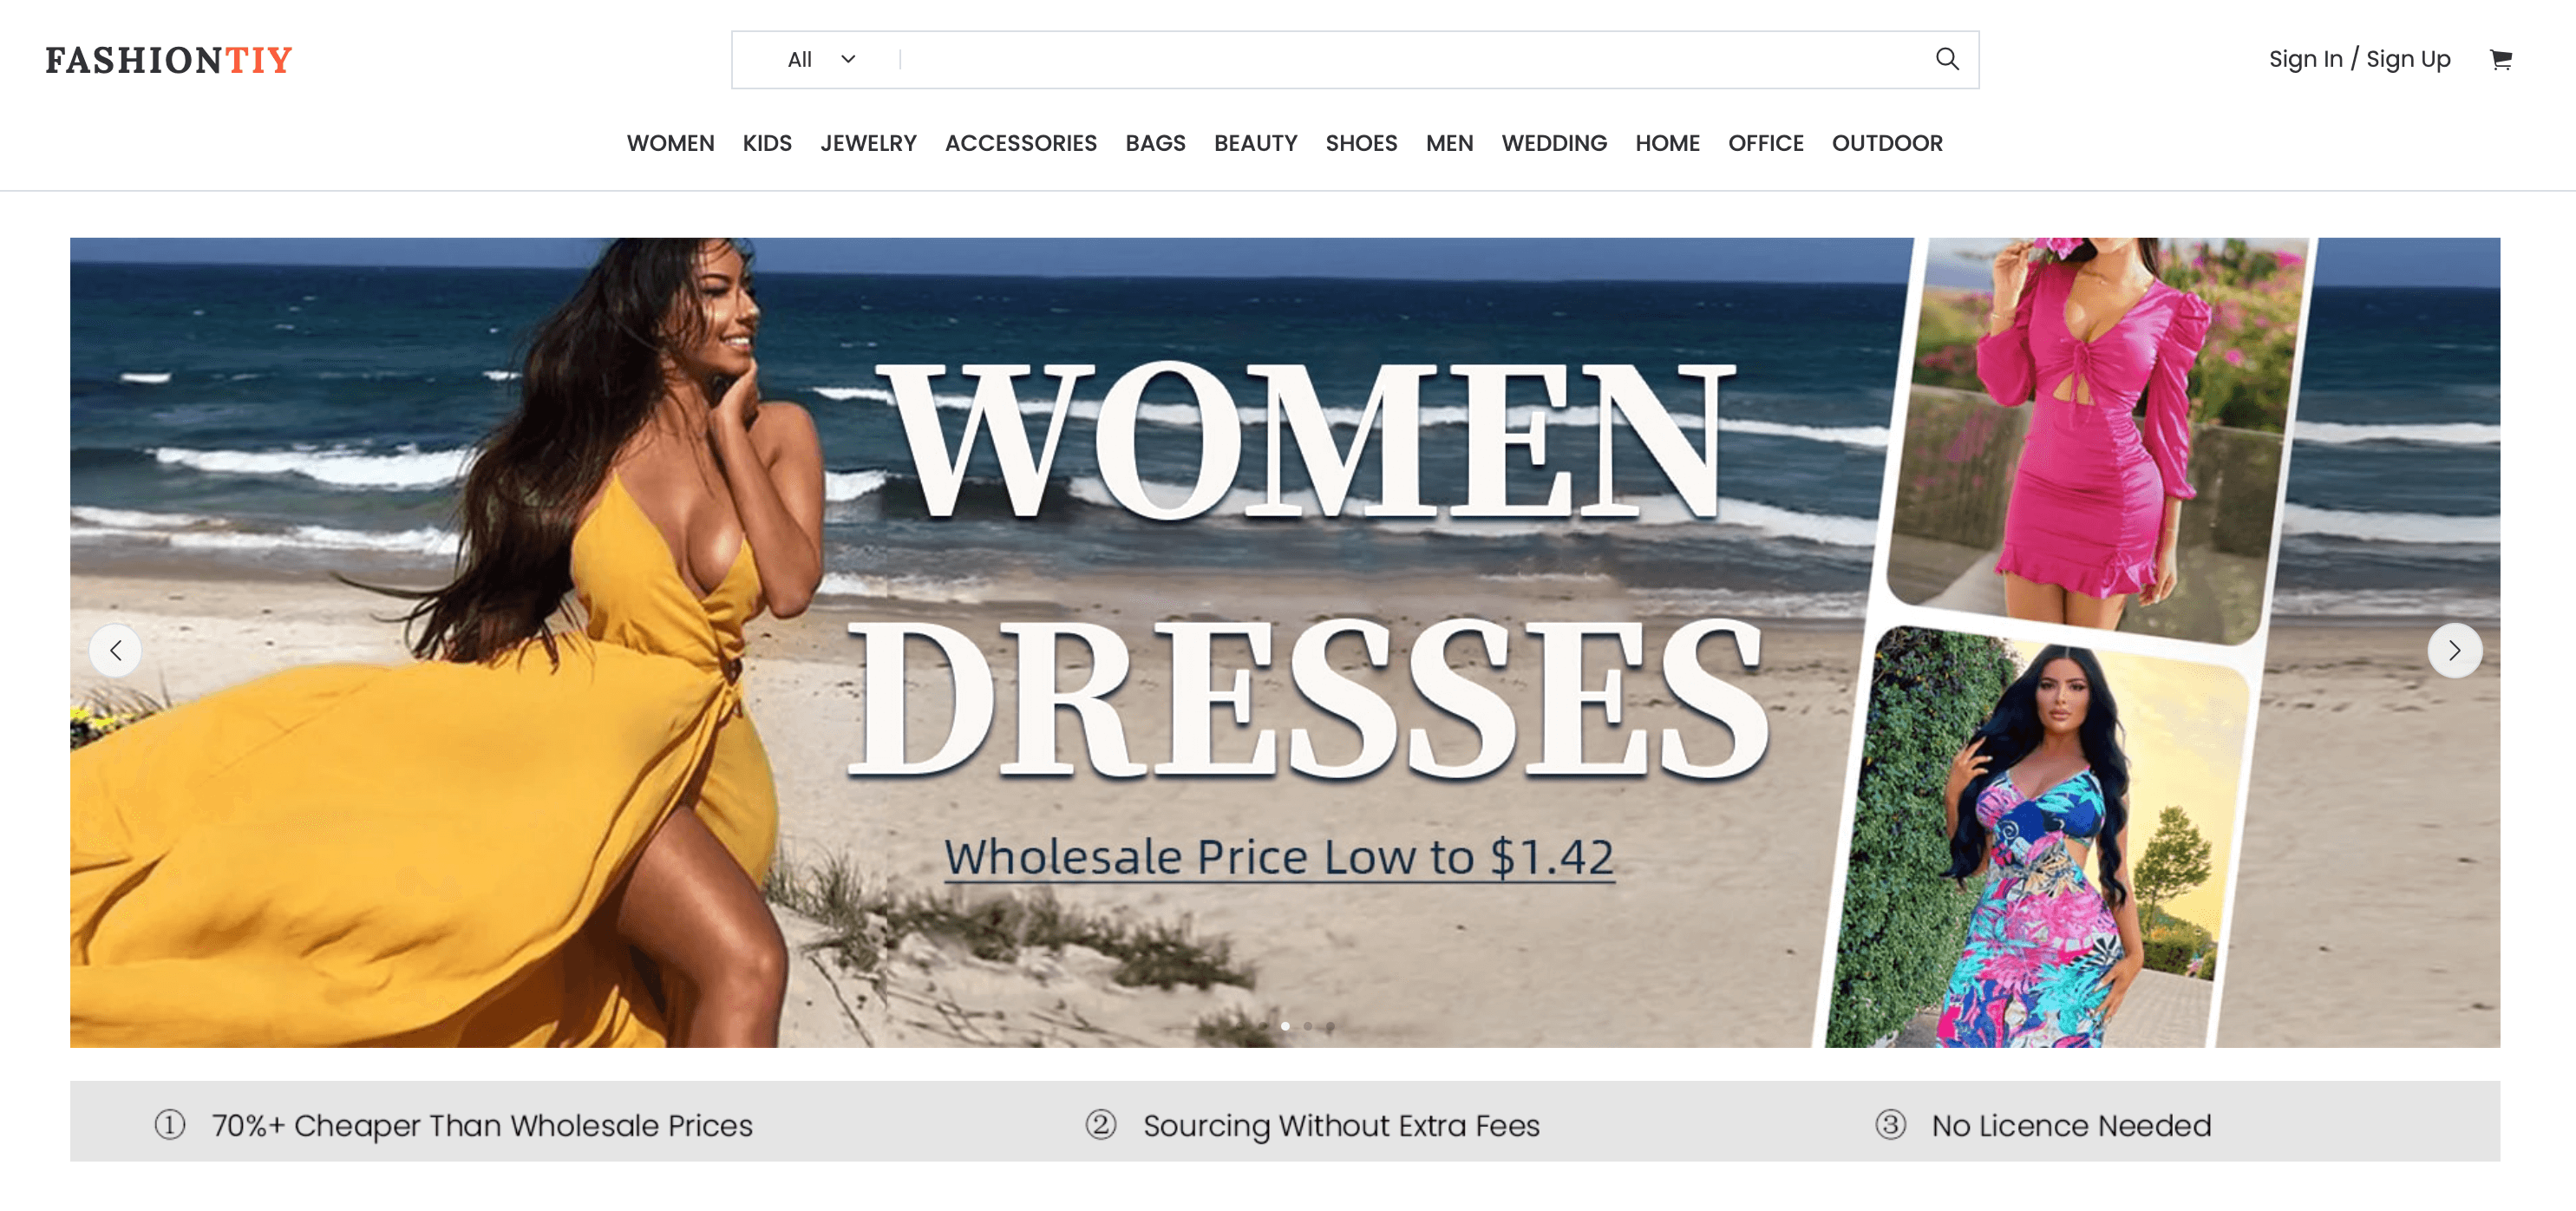 FashionTIY's home page